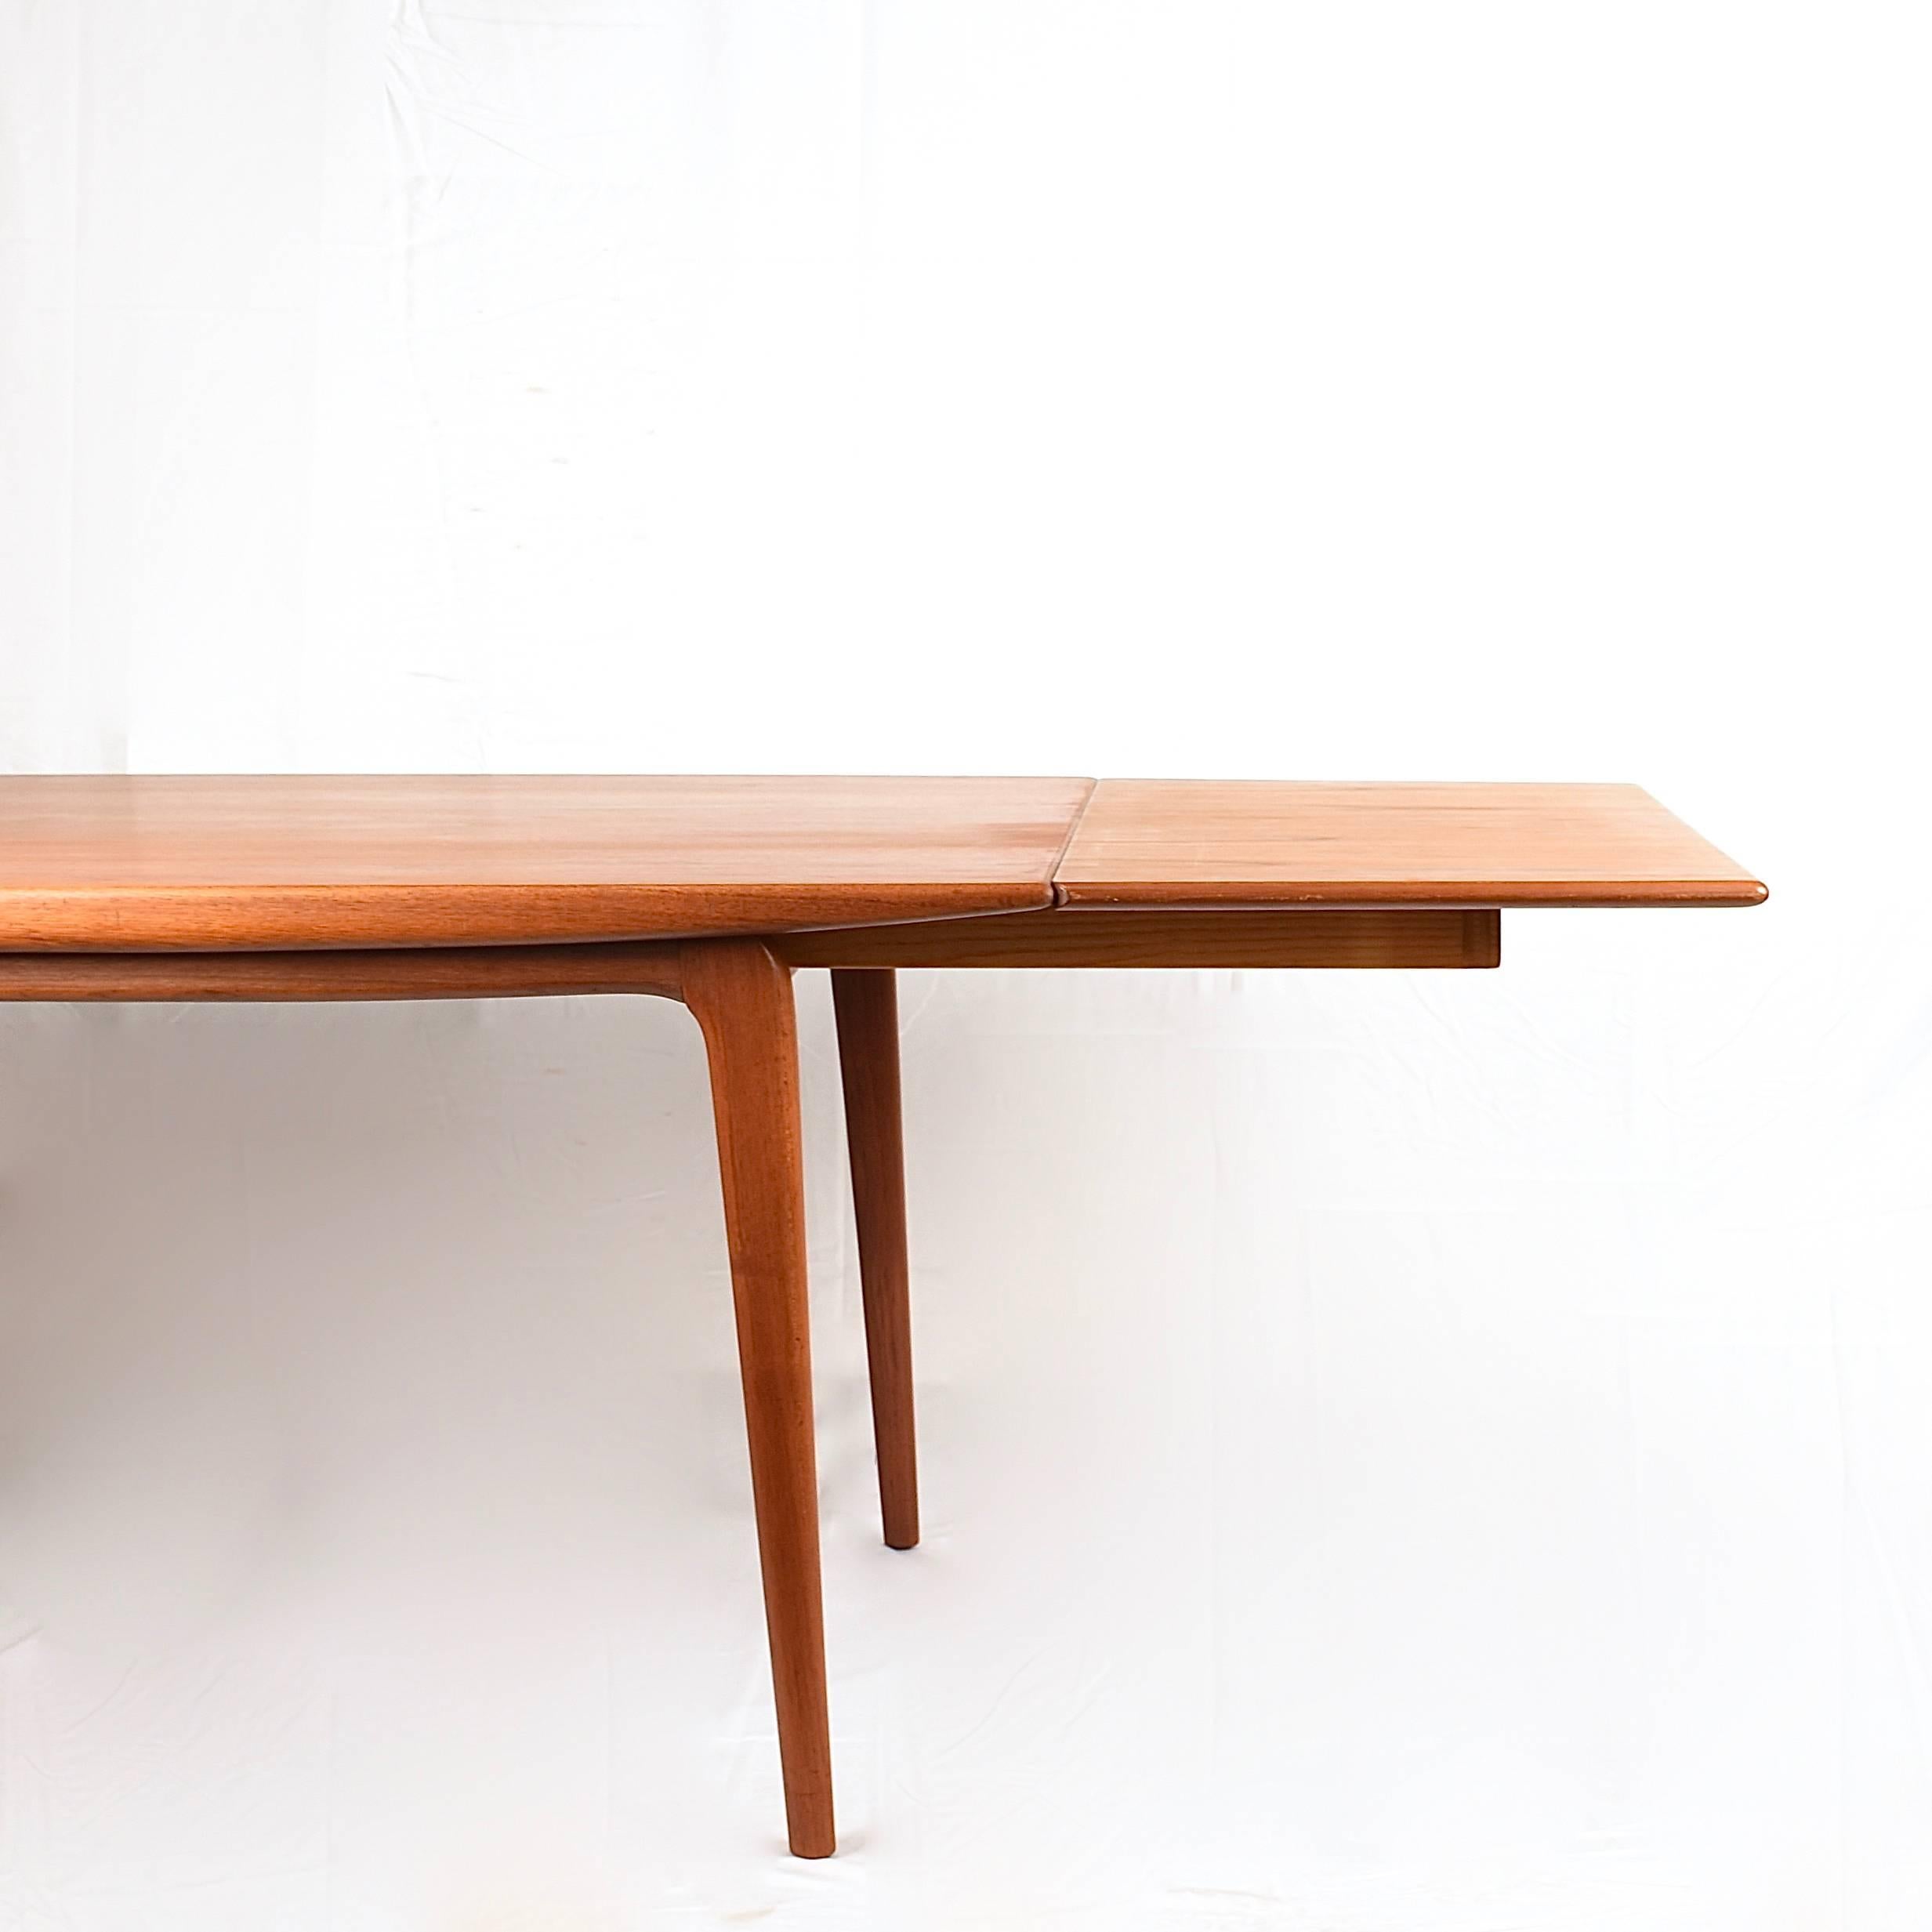 Beautiful vintage Danish Erik Christiensen teak boomerang table with leaves. Exquisite tapered tabletop set on wonderfully crafted 'boomerang' style legs. Made in Denmark.
 